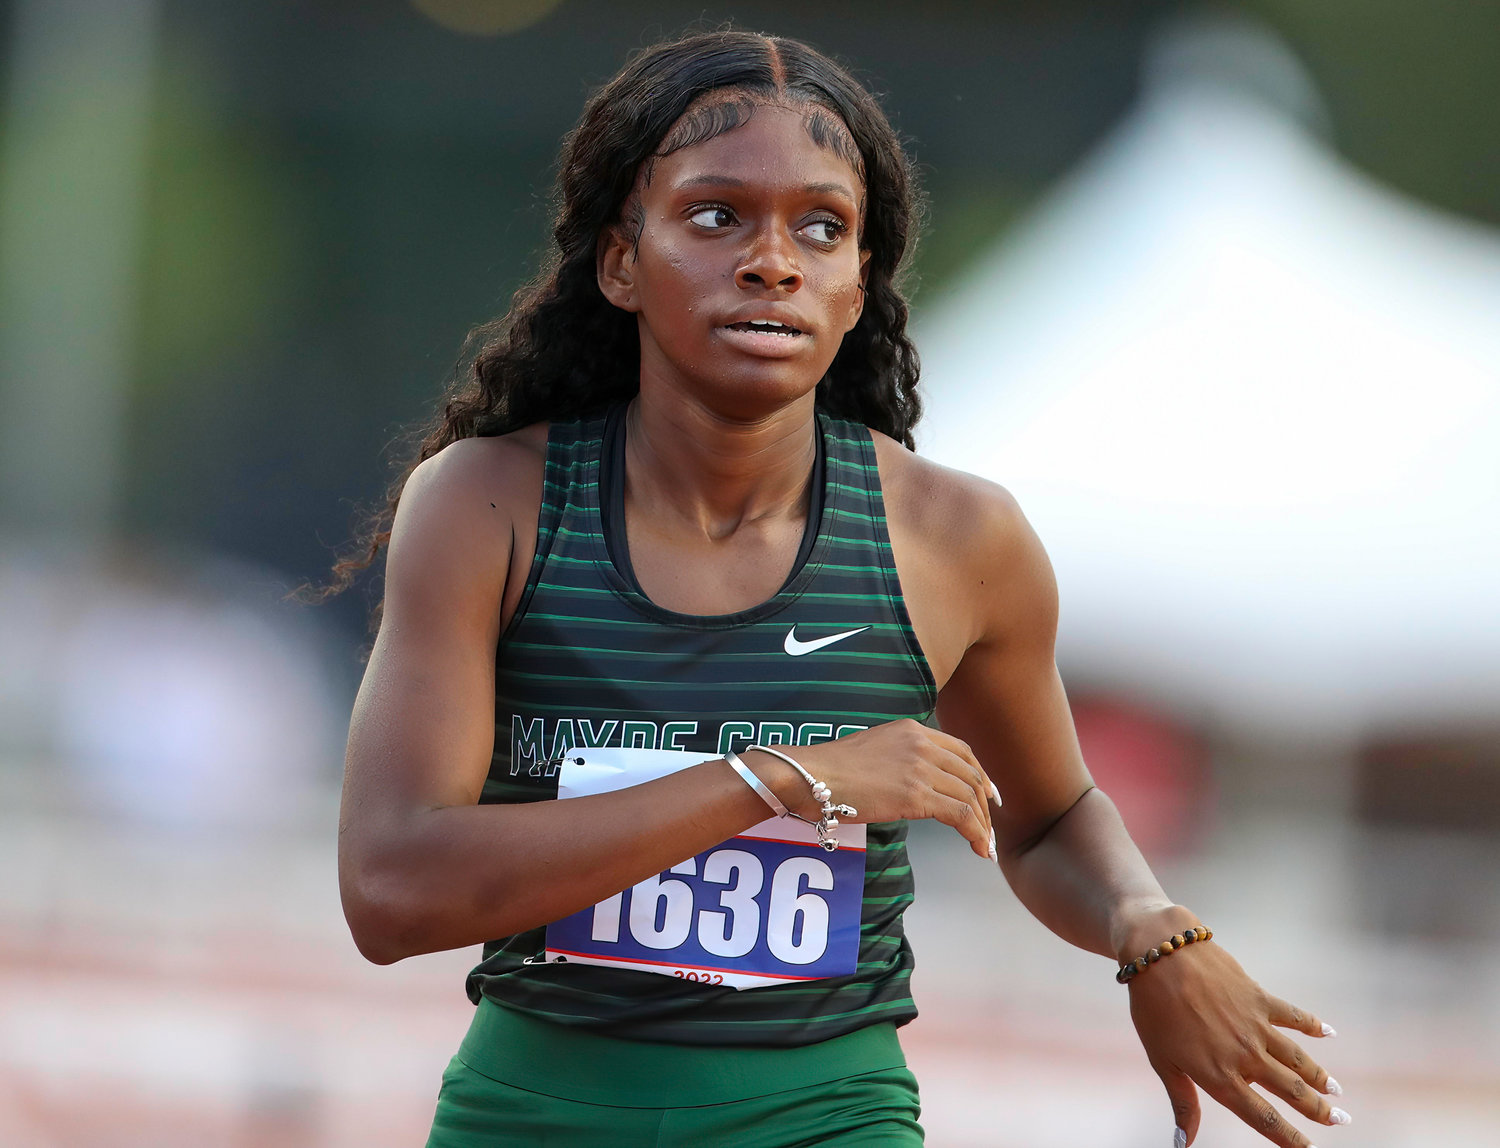 Simone Ballard of Mayde Creek looks up at the scoreboard after running in the Class 6A girls 300-meter hurdles at the UIL State Track and Field Meet on May 14, 2022 in Austin, Texas. Ballard earned a gold medal in the event with a time of 41.11.